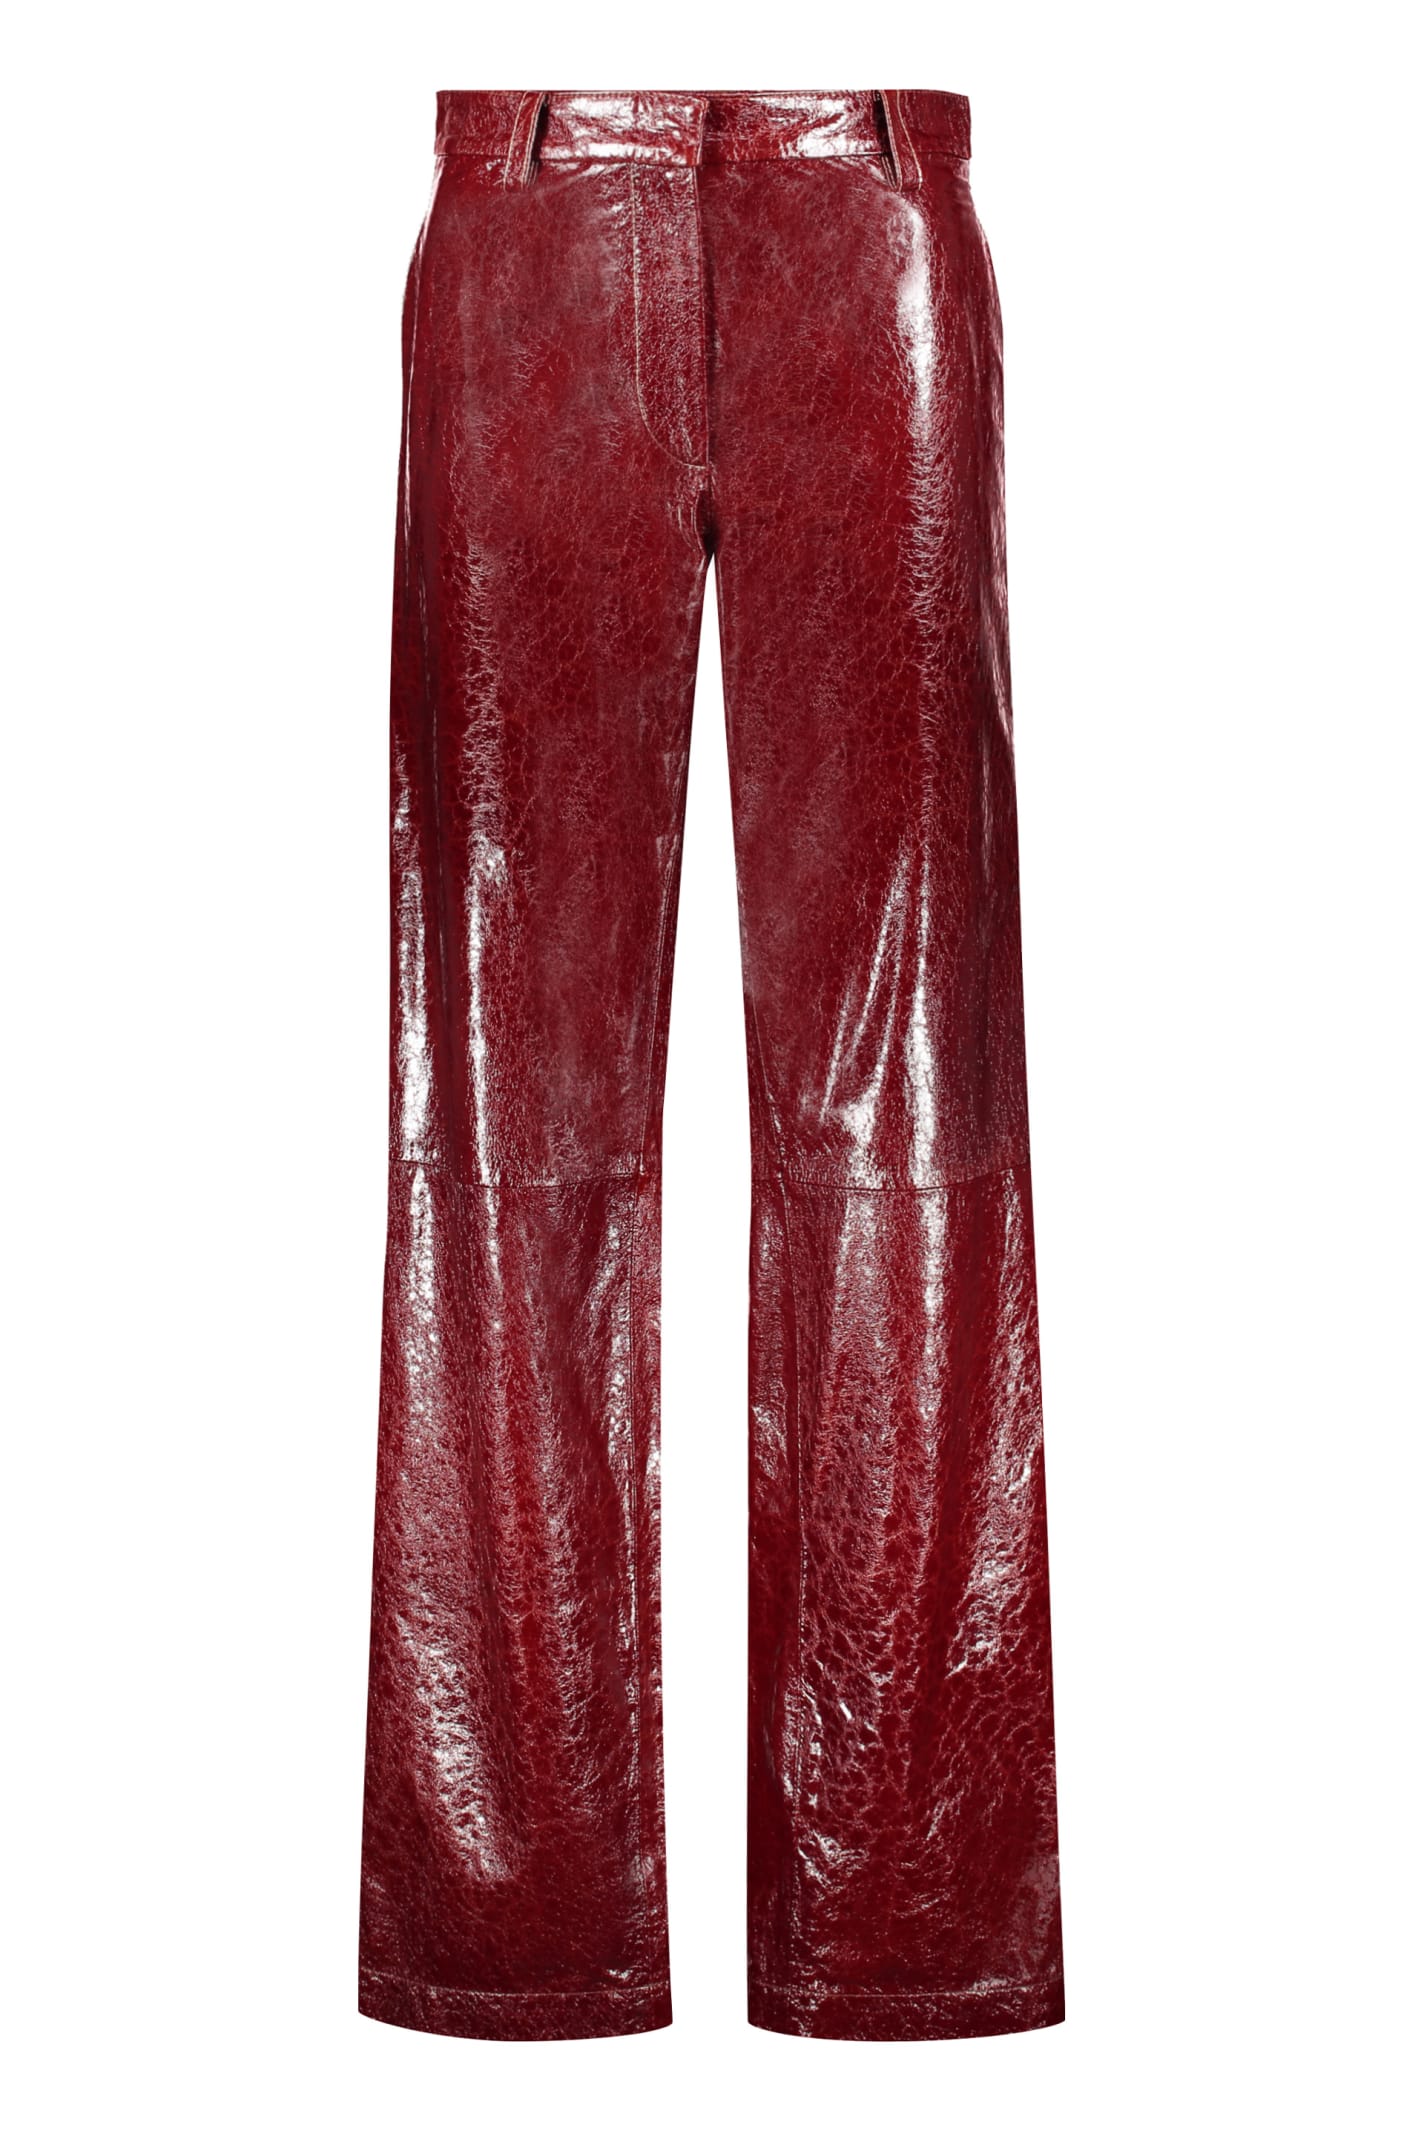 Missoni Leather Pants In Burgundy